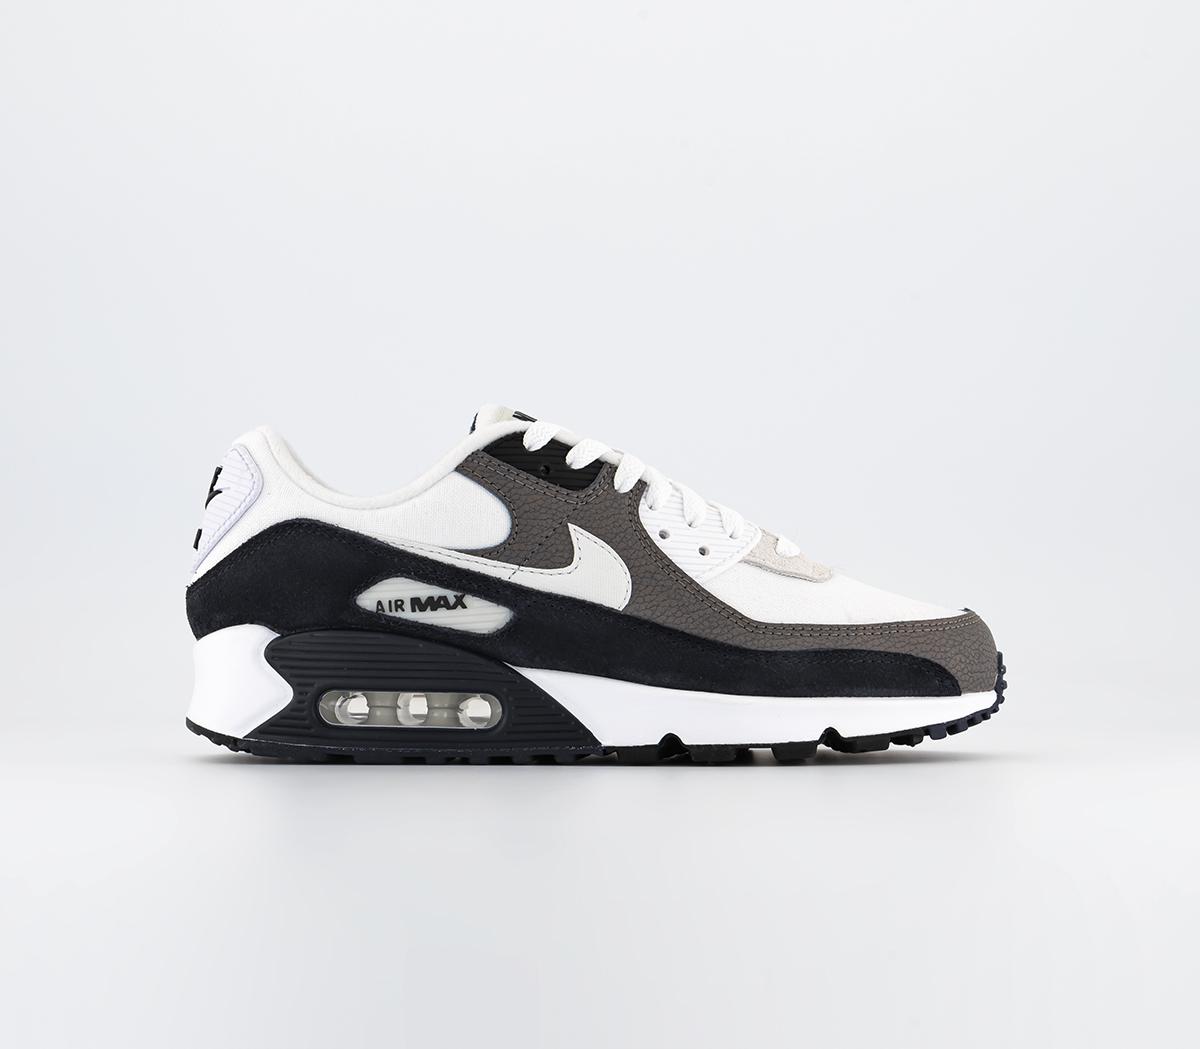 Nike Air Max 90 Trainers Flat Pewter White Black Obsidian - Men's Trainers